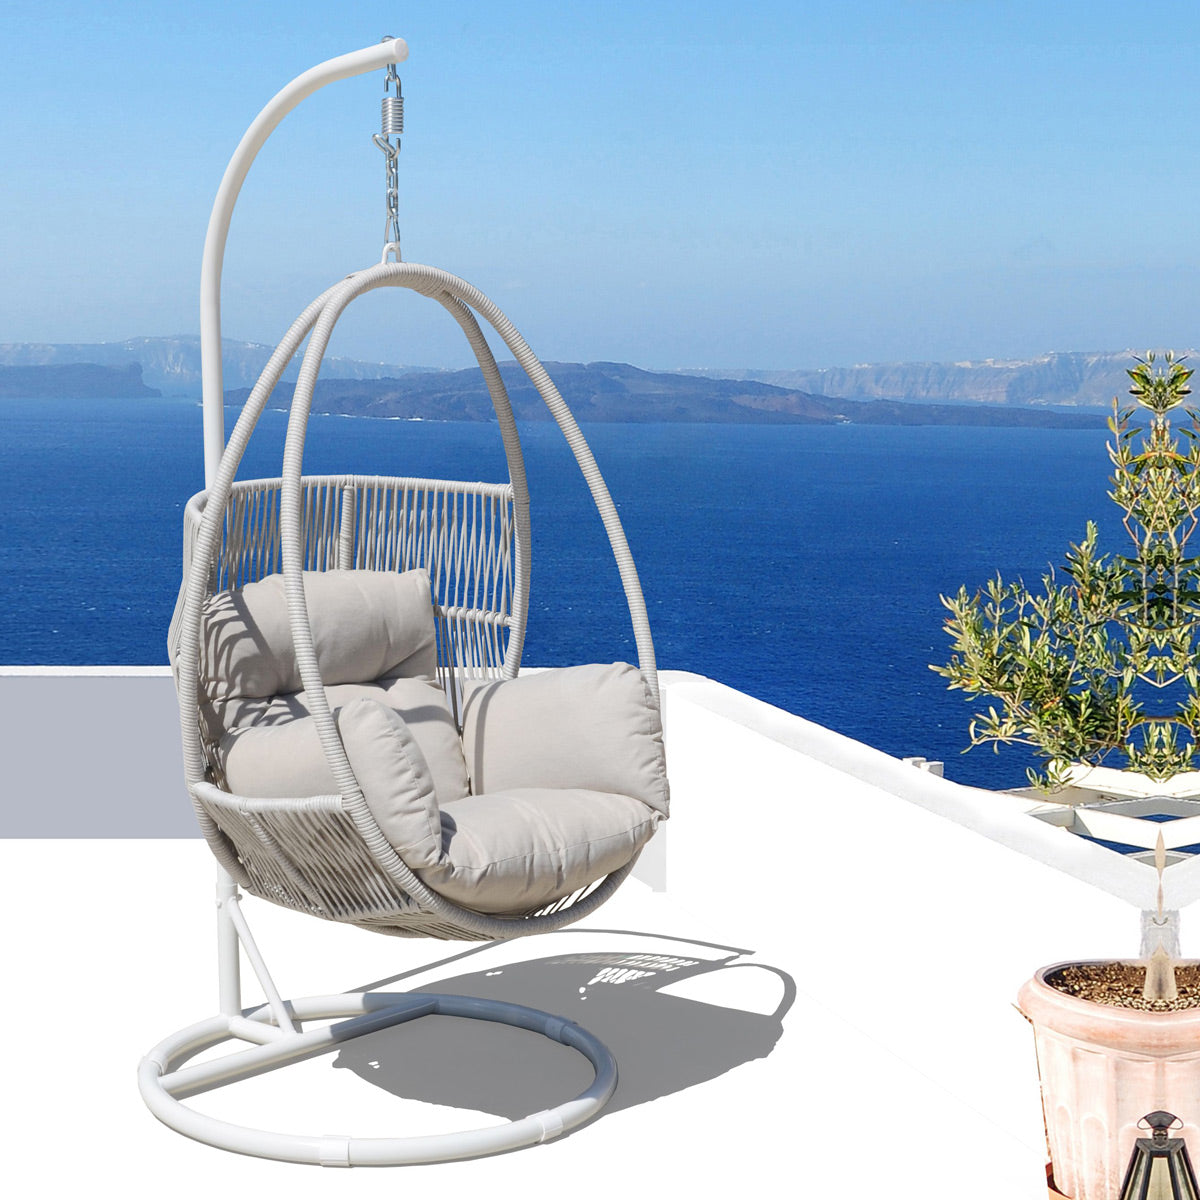 Fusing Style and Endurance: Vast Furniture's New Outdoor Range